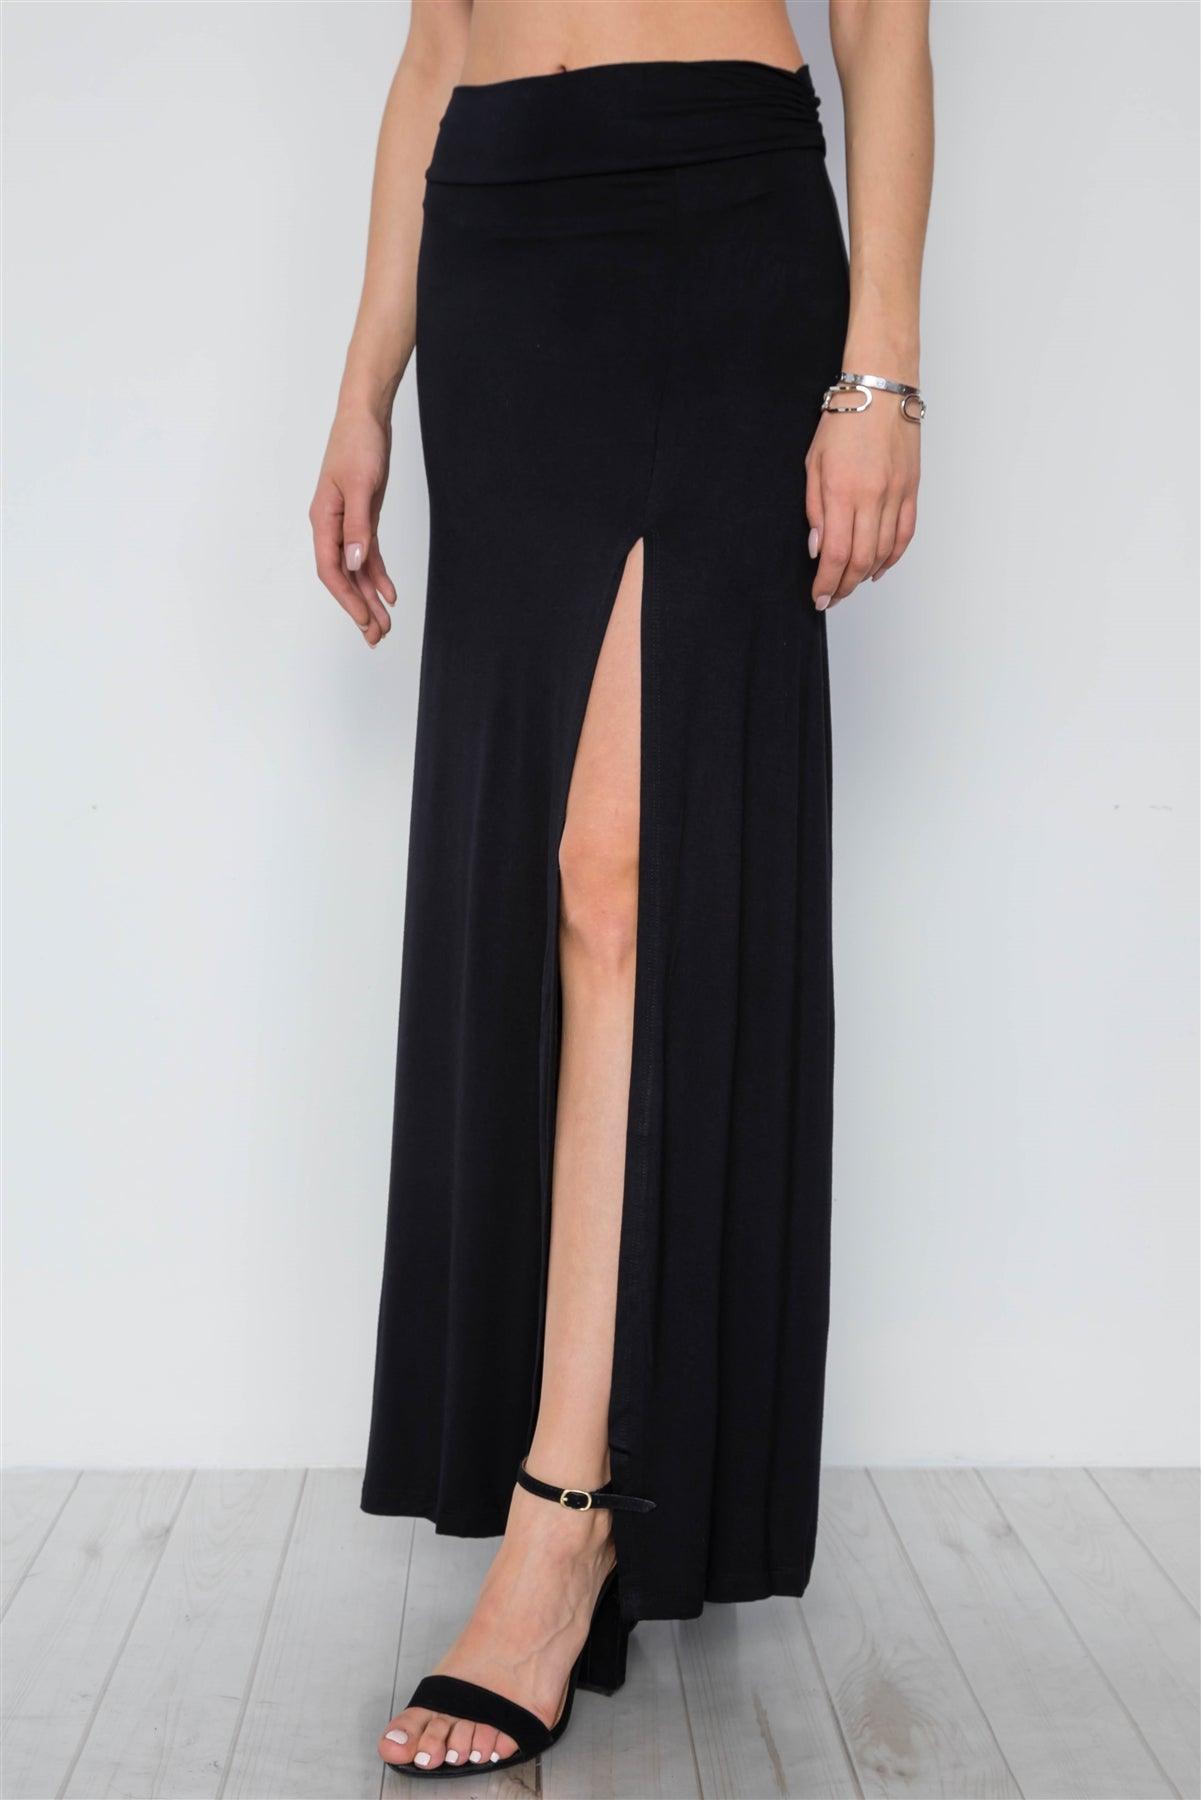 Black Solid Side Slit Mid-Rise Stretchy Maxi Skirt /2-2-2